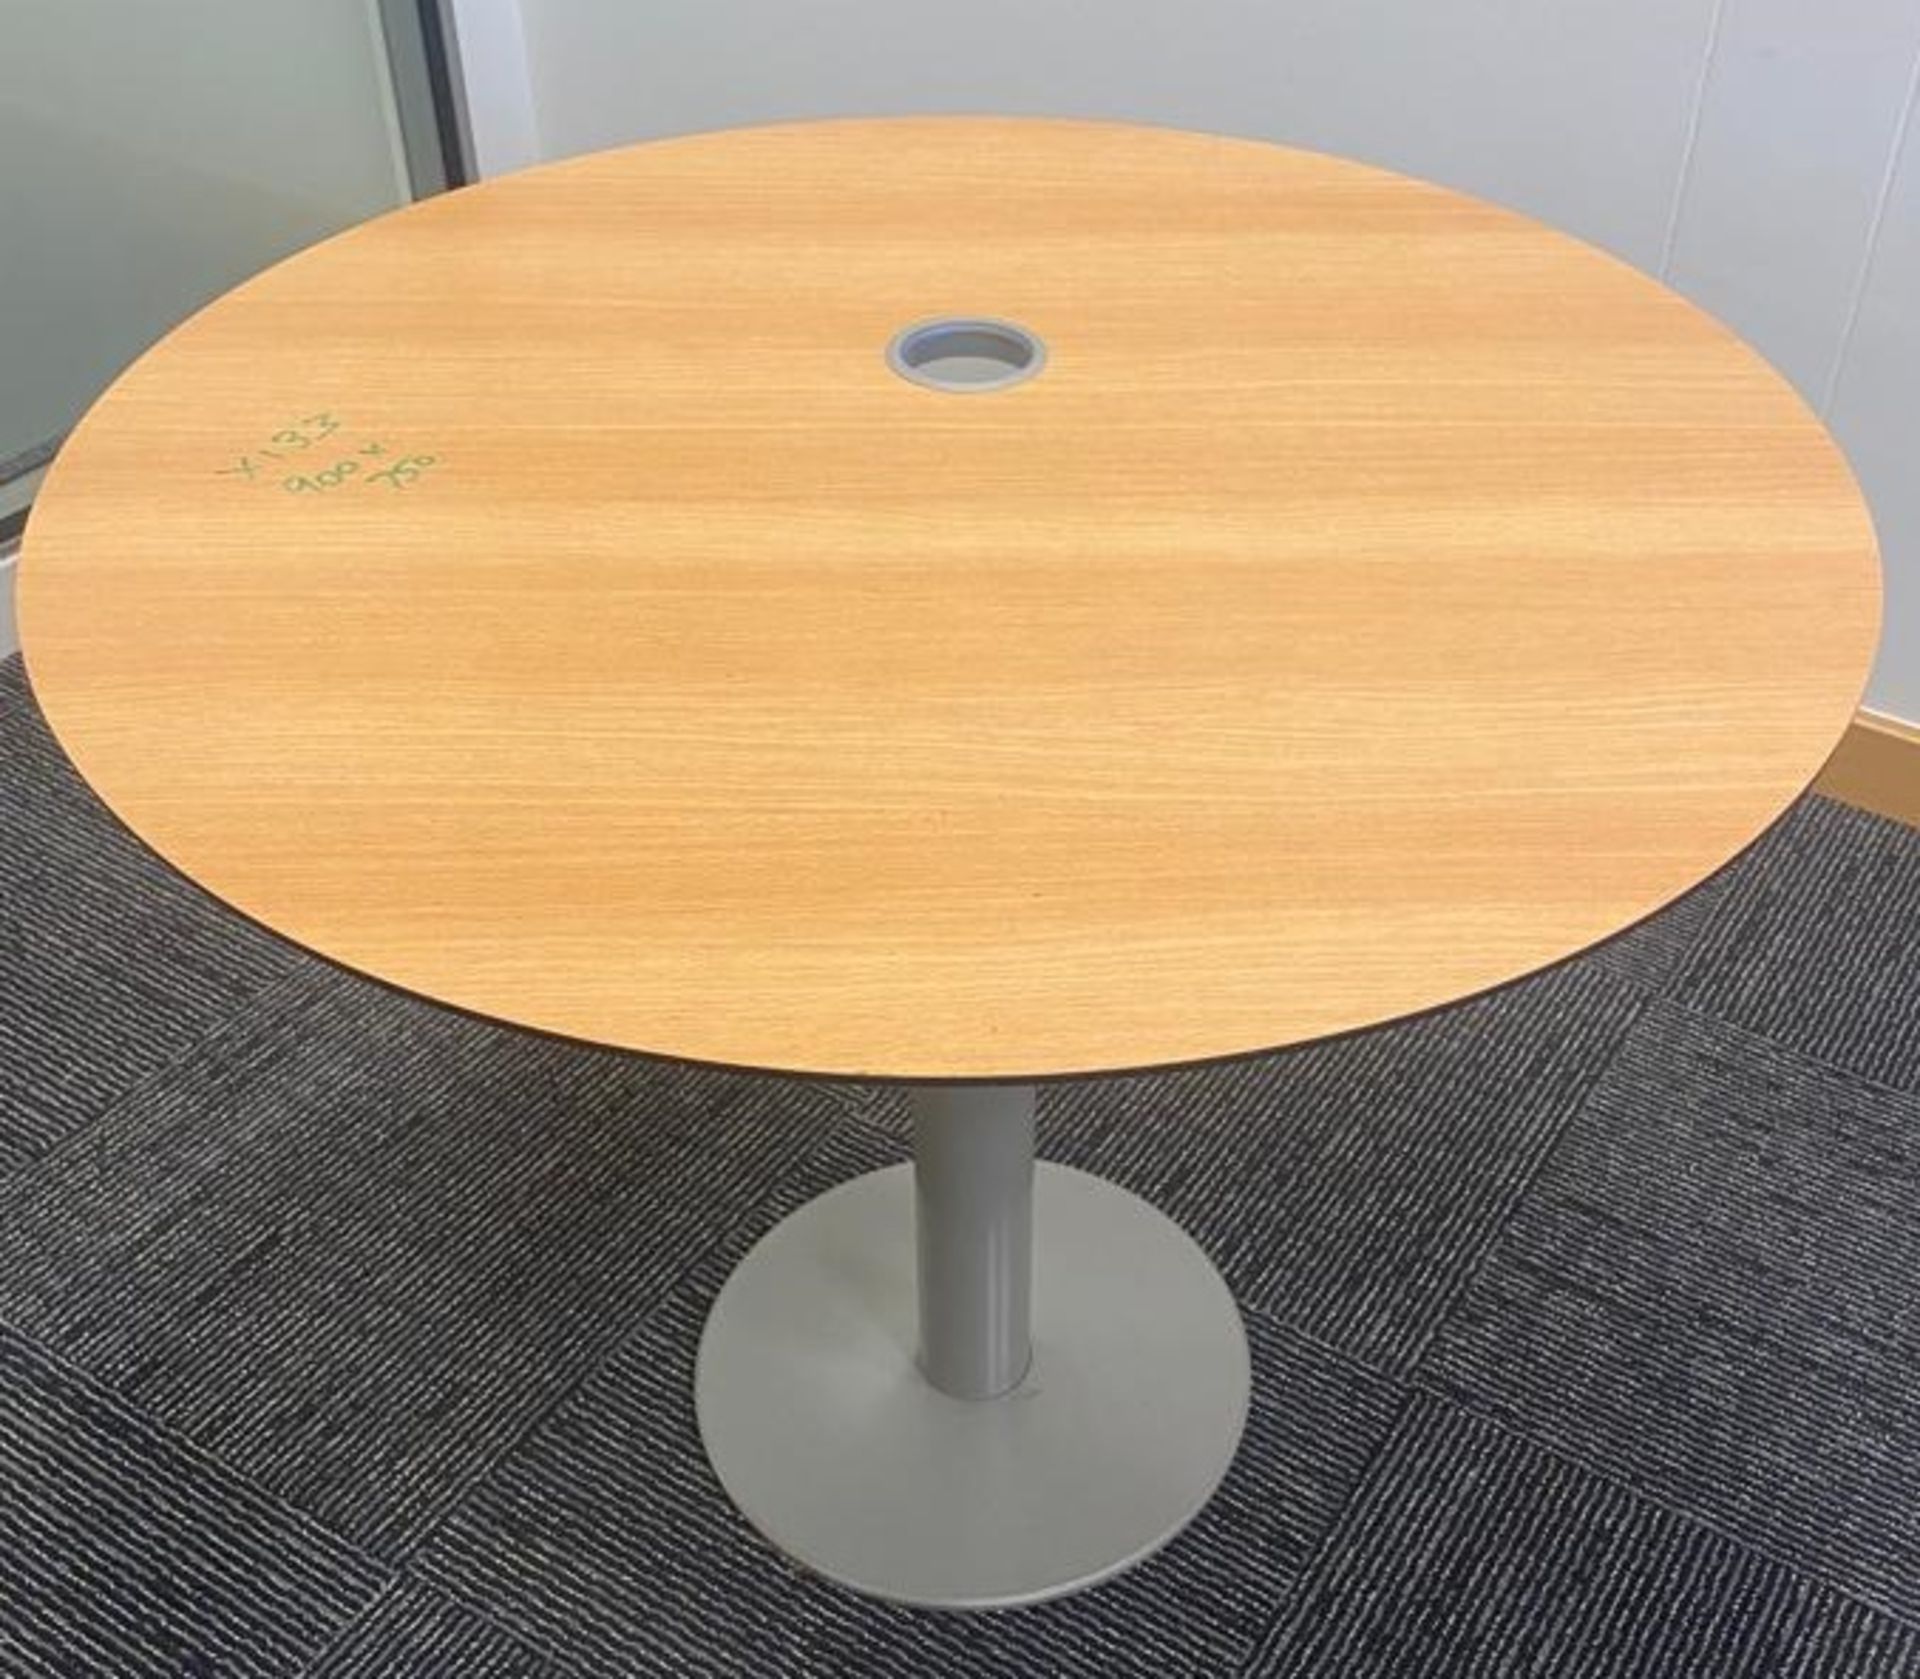 1 x Round Office Meeting Table With a Beech Wood Finish and Grey Pedestal Base - Size: H75 x W90 - Image 3 of 3